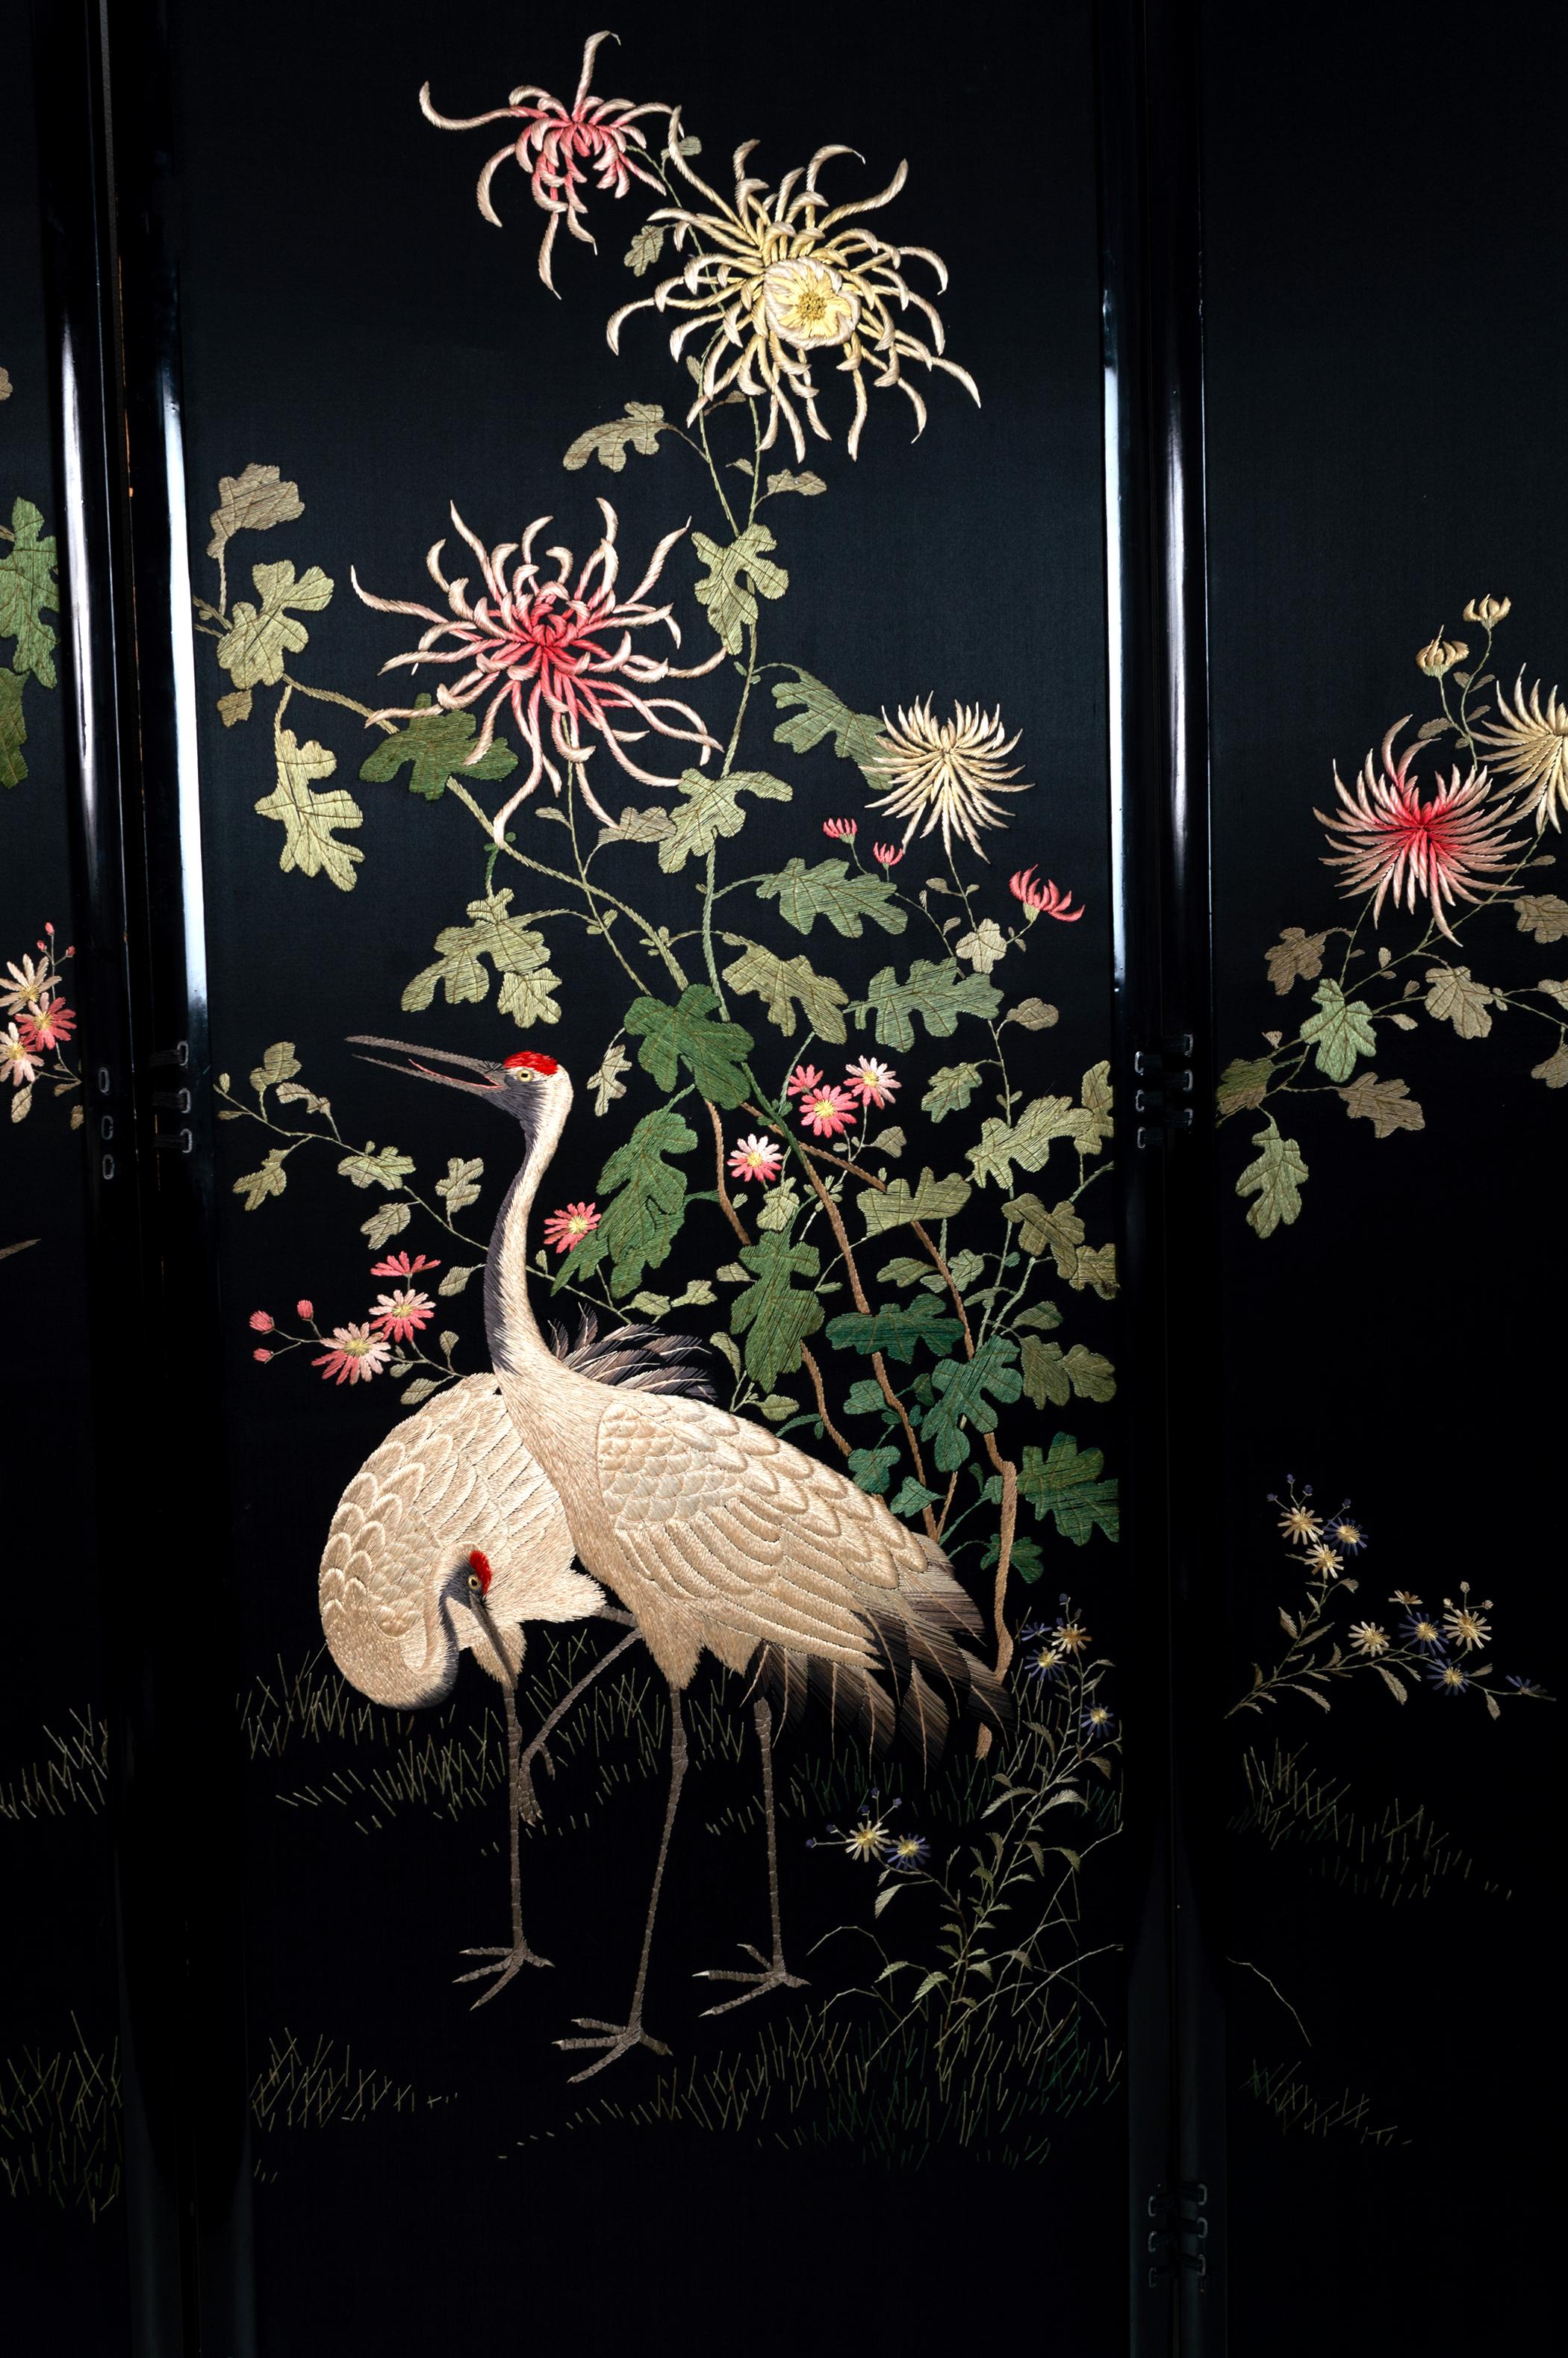 Antique Japanese Meiji period silk embroidered screen /room divider Byobu C.1900 Kyoto, Japan.

Silk embroidered satin lacquer framed panels.

Late 19th century - early 20th century 
Meiji Period (1868 - 1912)

Similar to those seen in the Kiyomizu